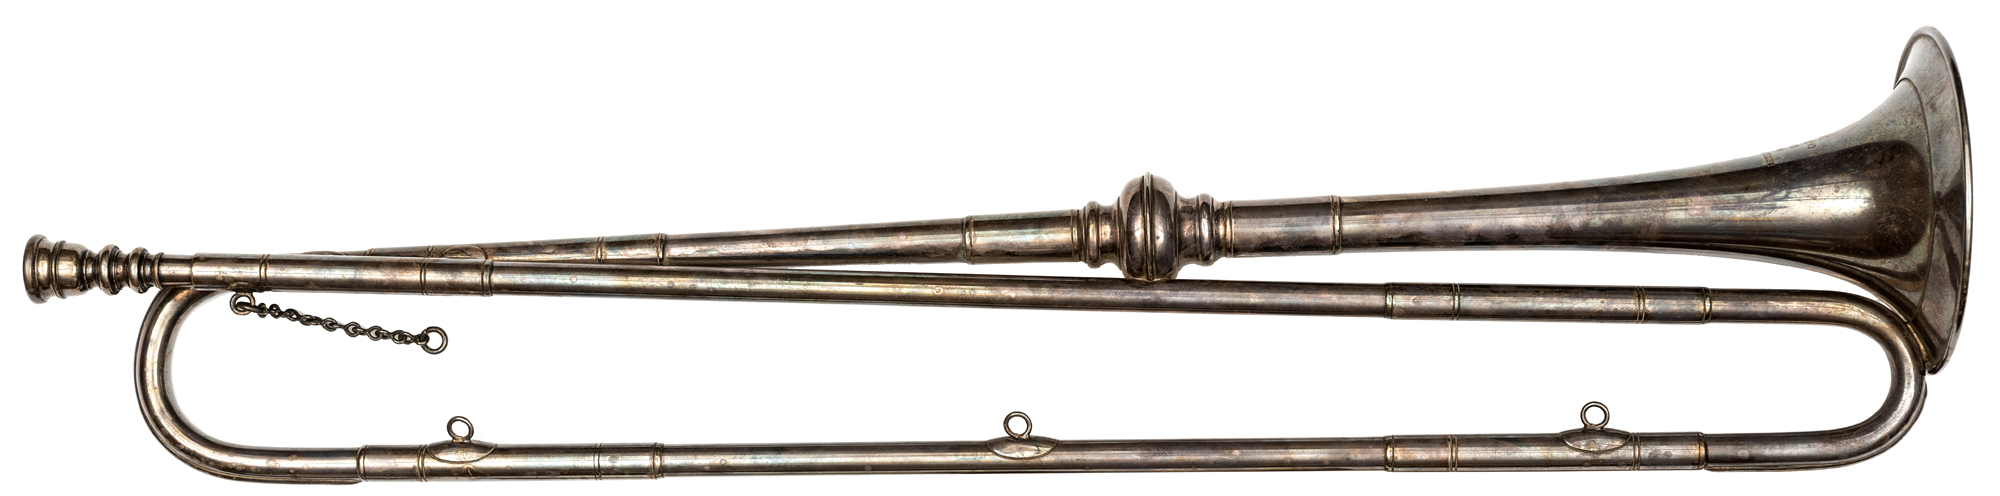 A silver plated State trumpet, panelled sections with prominent central knop, mouthpiece and chain